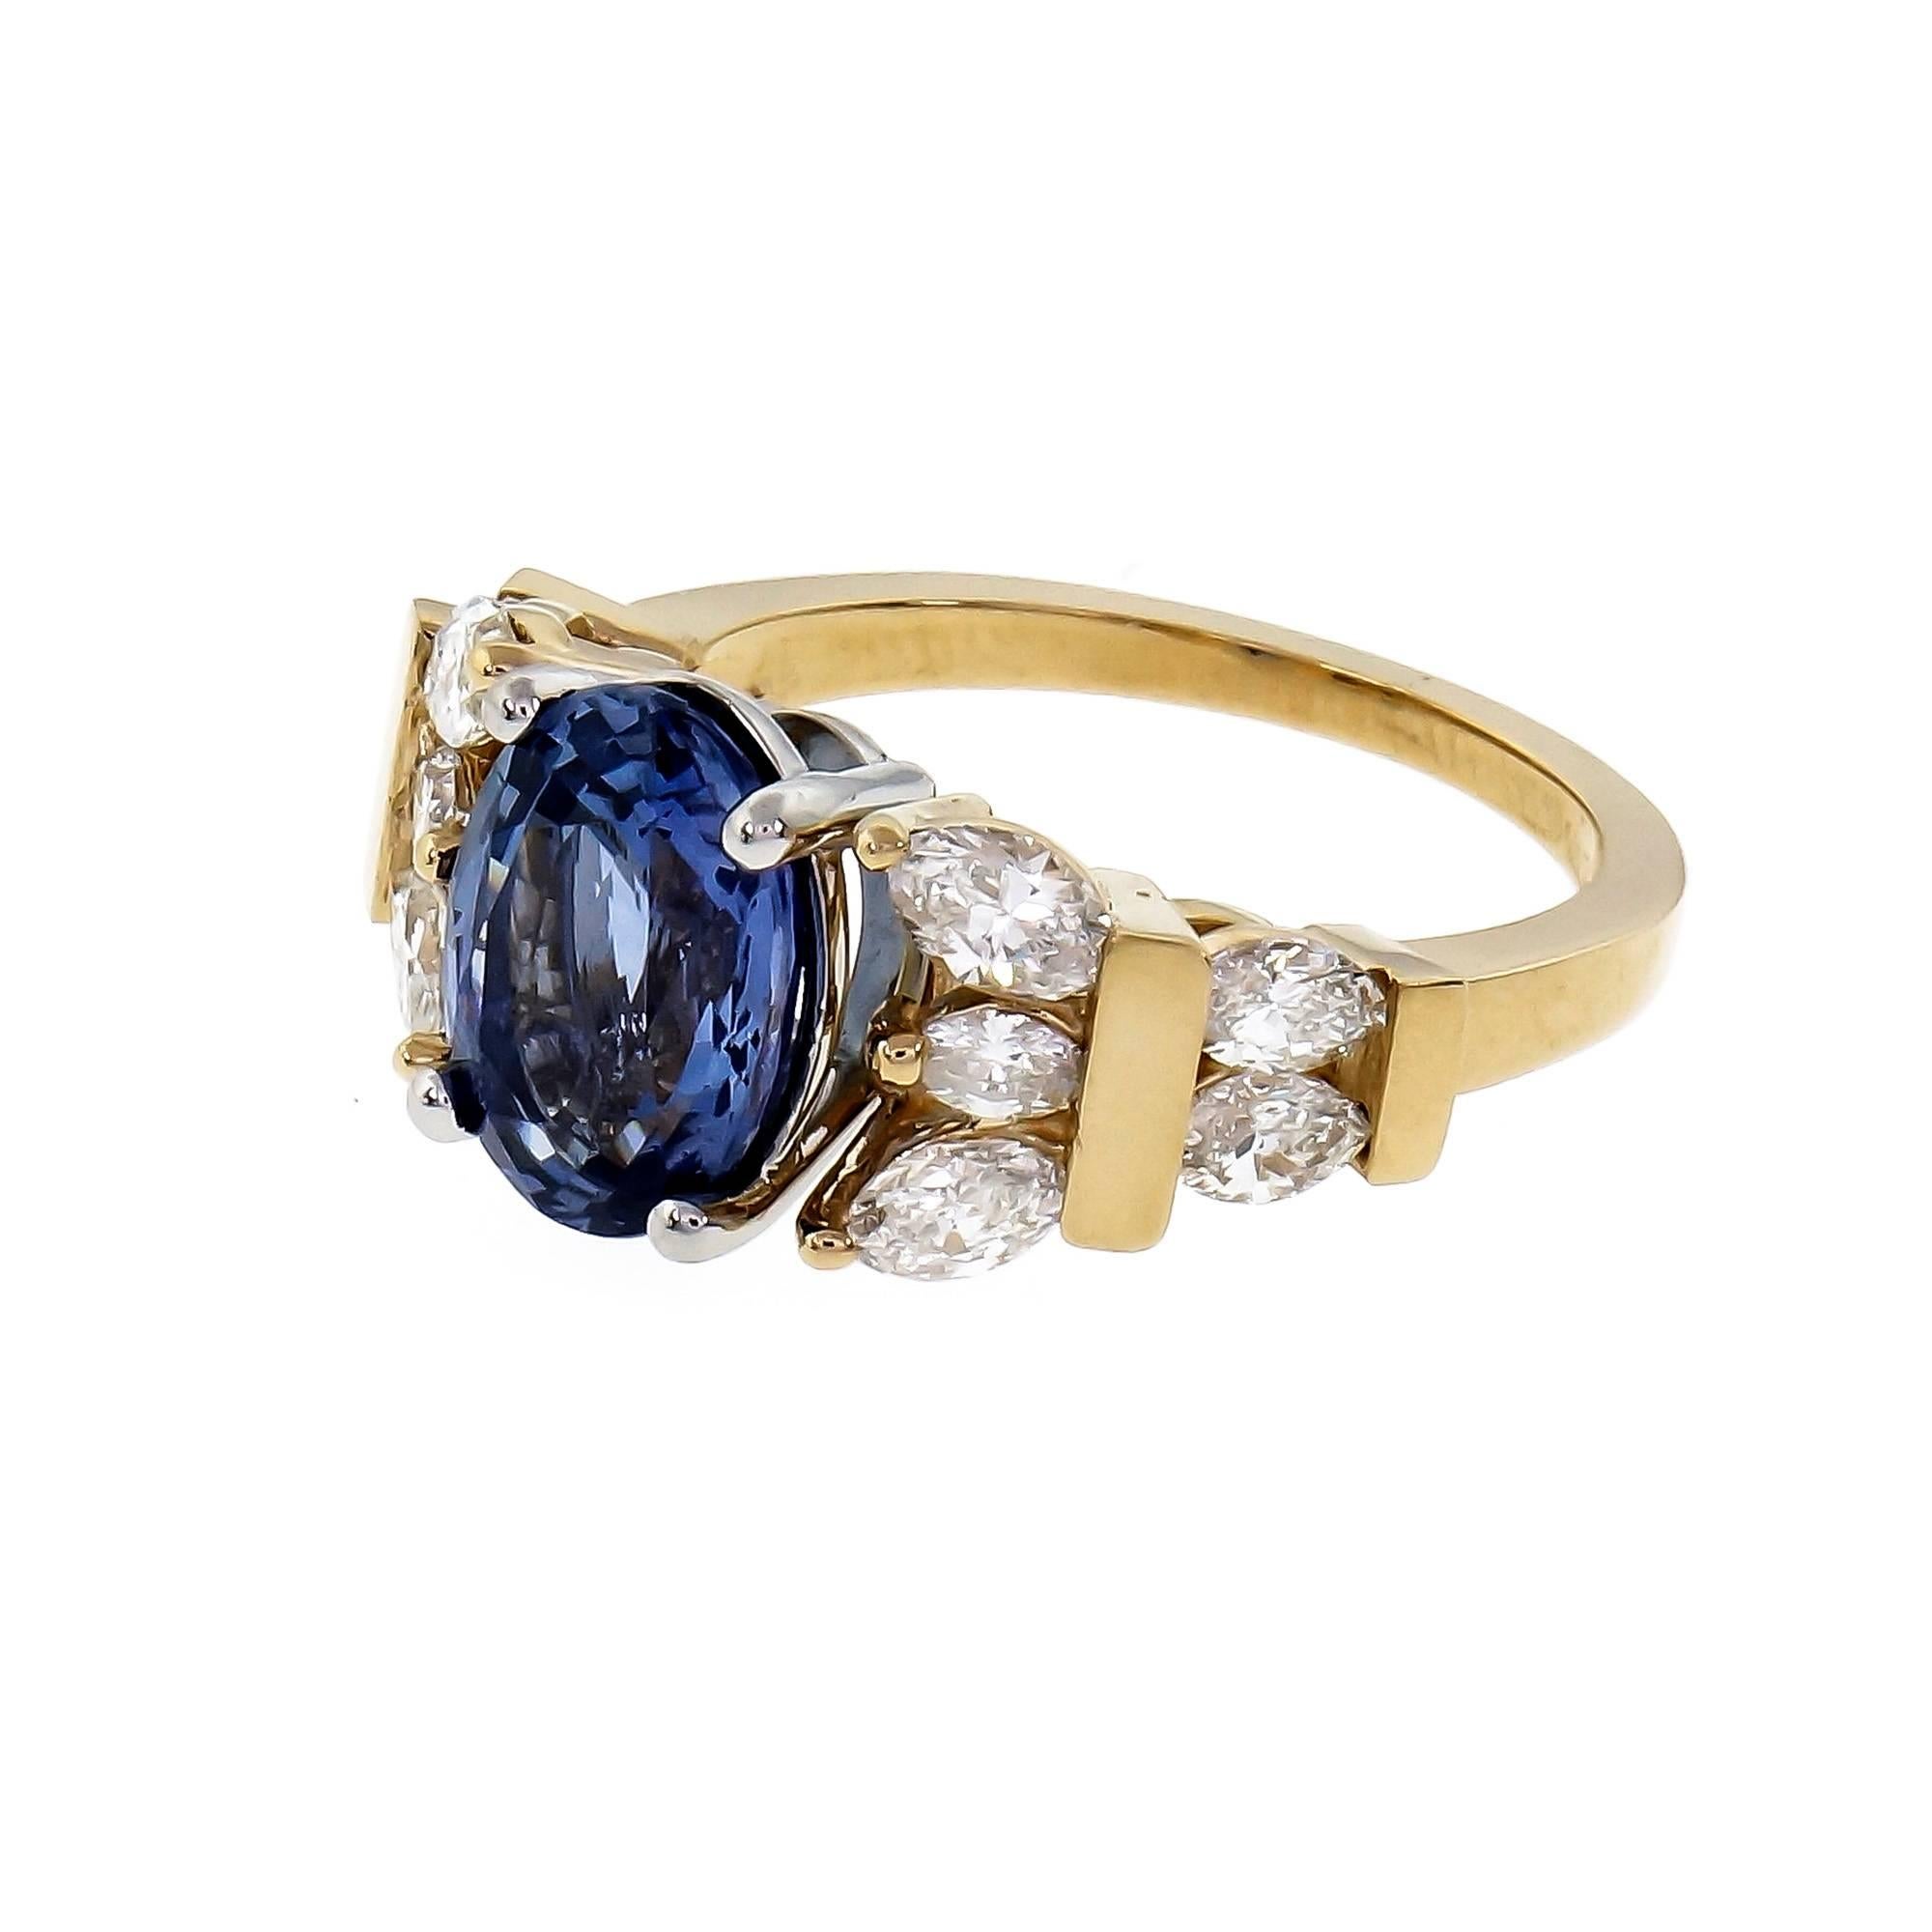 Peter Suchy Periwinkle blue oval 3.11ct Sapphire engagement ring in 14k yellow gold with a Platinum center for the bright medium blue natural Sapphire simple heat only.  AGL Certified 

1 oval periwinkle blue Sapphire, approx. total weight 3.11cts,